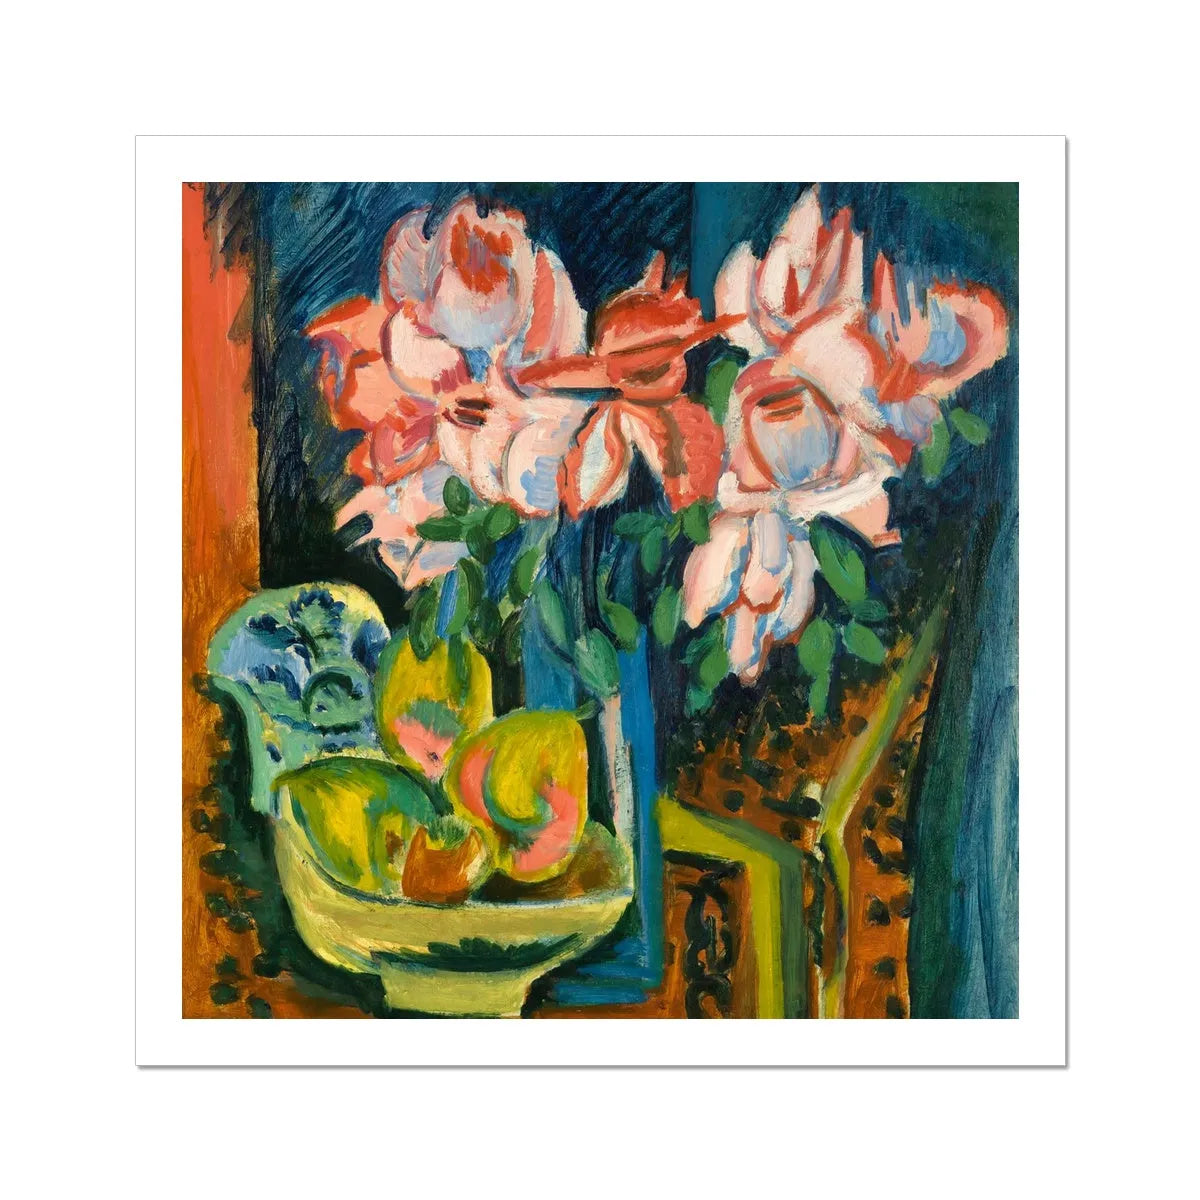 Pink Roses By Ernst Ludwig Kirchner Fine Art Print - 20’x20’ - Posters Prints & Visual Artwork - Aesthetic Art